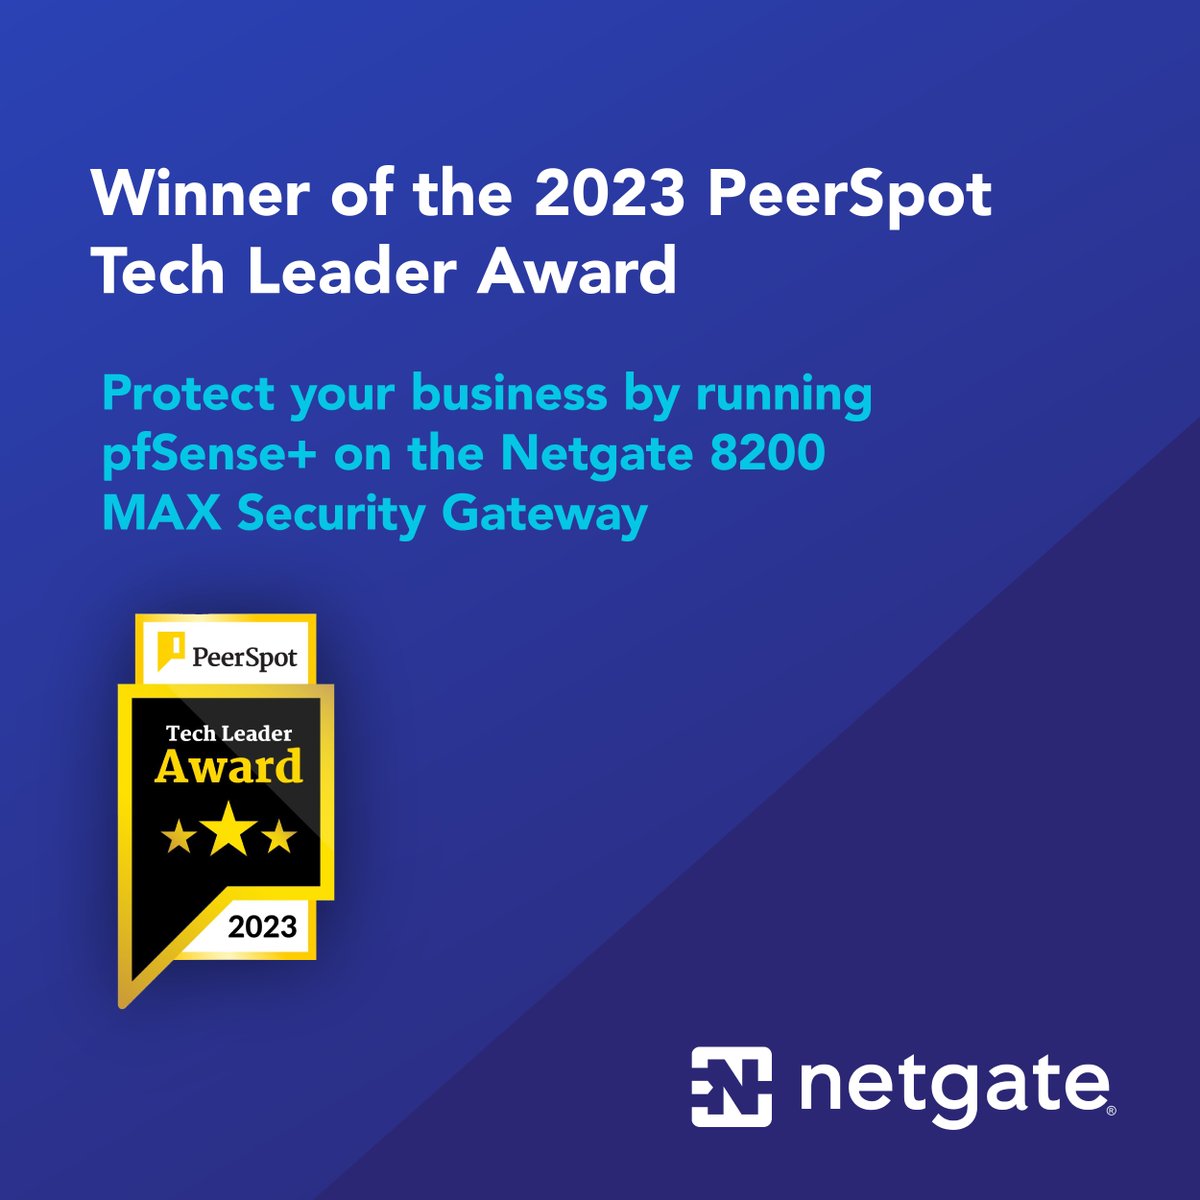 🏆 Exciting News! #pfSense® Software Wins 2023 PeerSpot Tech Leader award in Firewalls category! Enjoy a 10% discount on the #Netgate 8200 MAX #pfSense+ Security Gateway until Sept 30, 2023 🙌 Buy Now: hubs.ly/Q022N8lP0 #PSA23 #PeerSpot #TechLeader #EoSS23